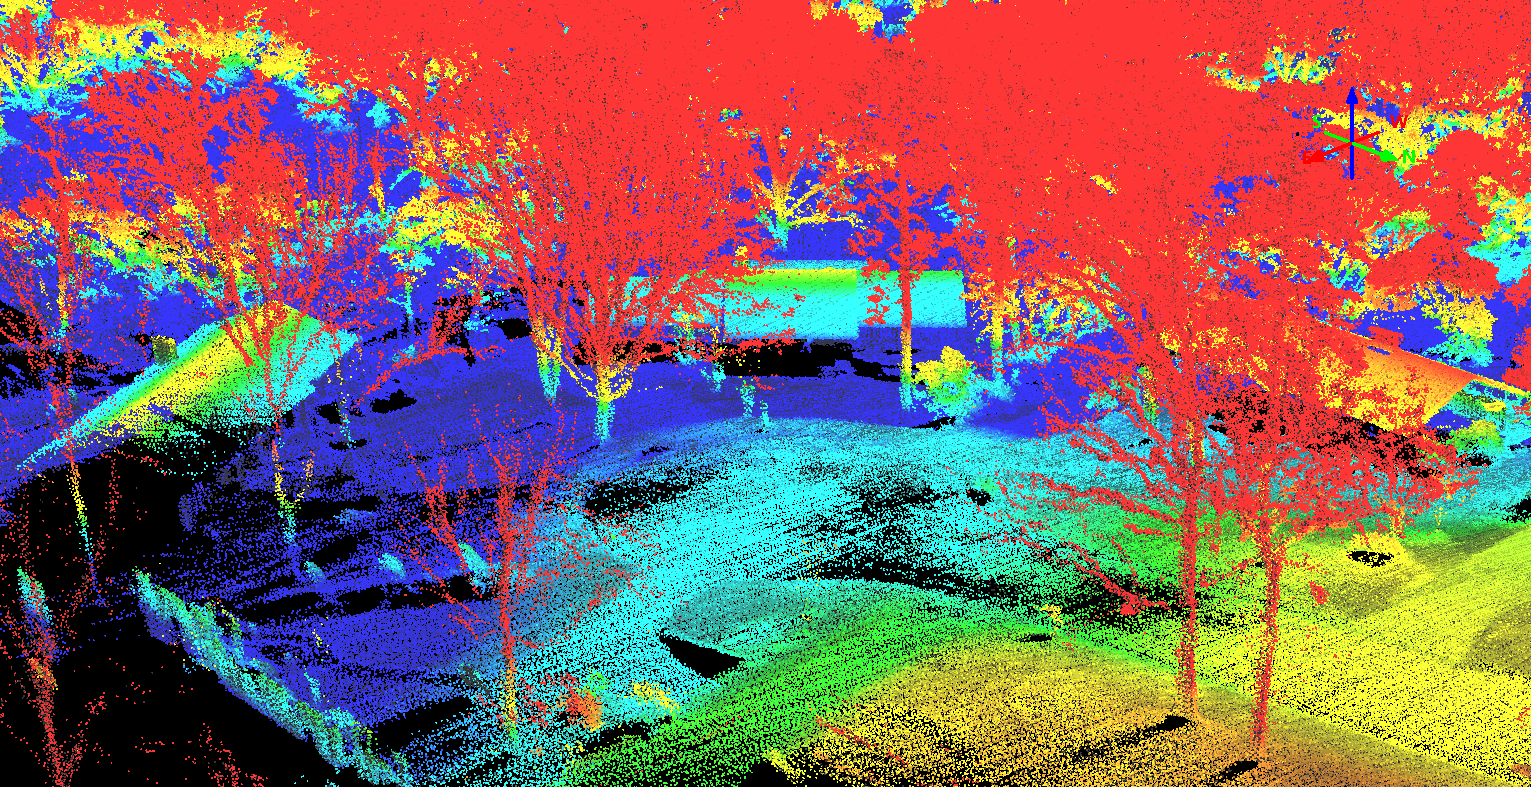 LIDAR point cloud captured by drone